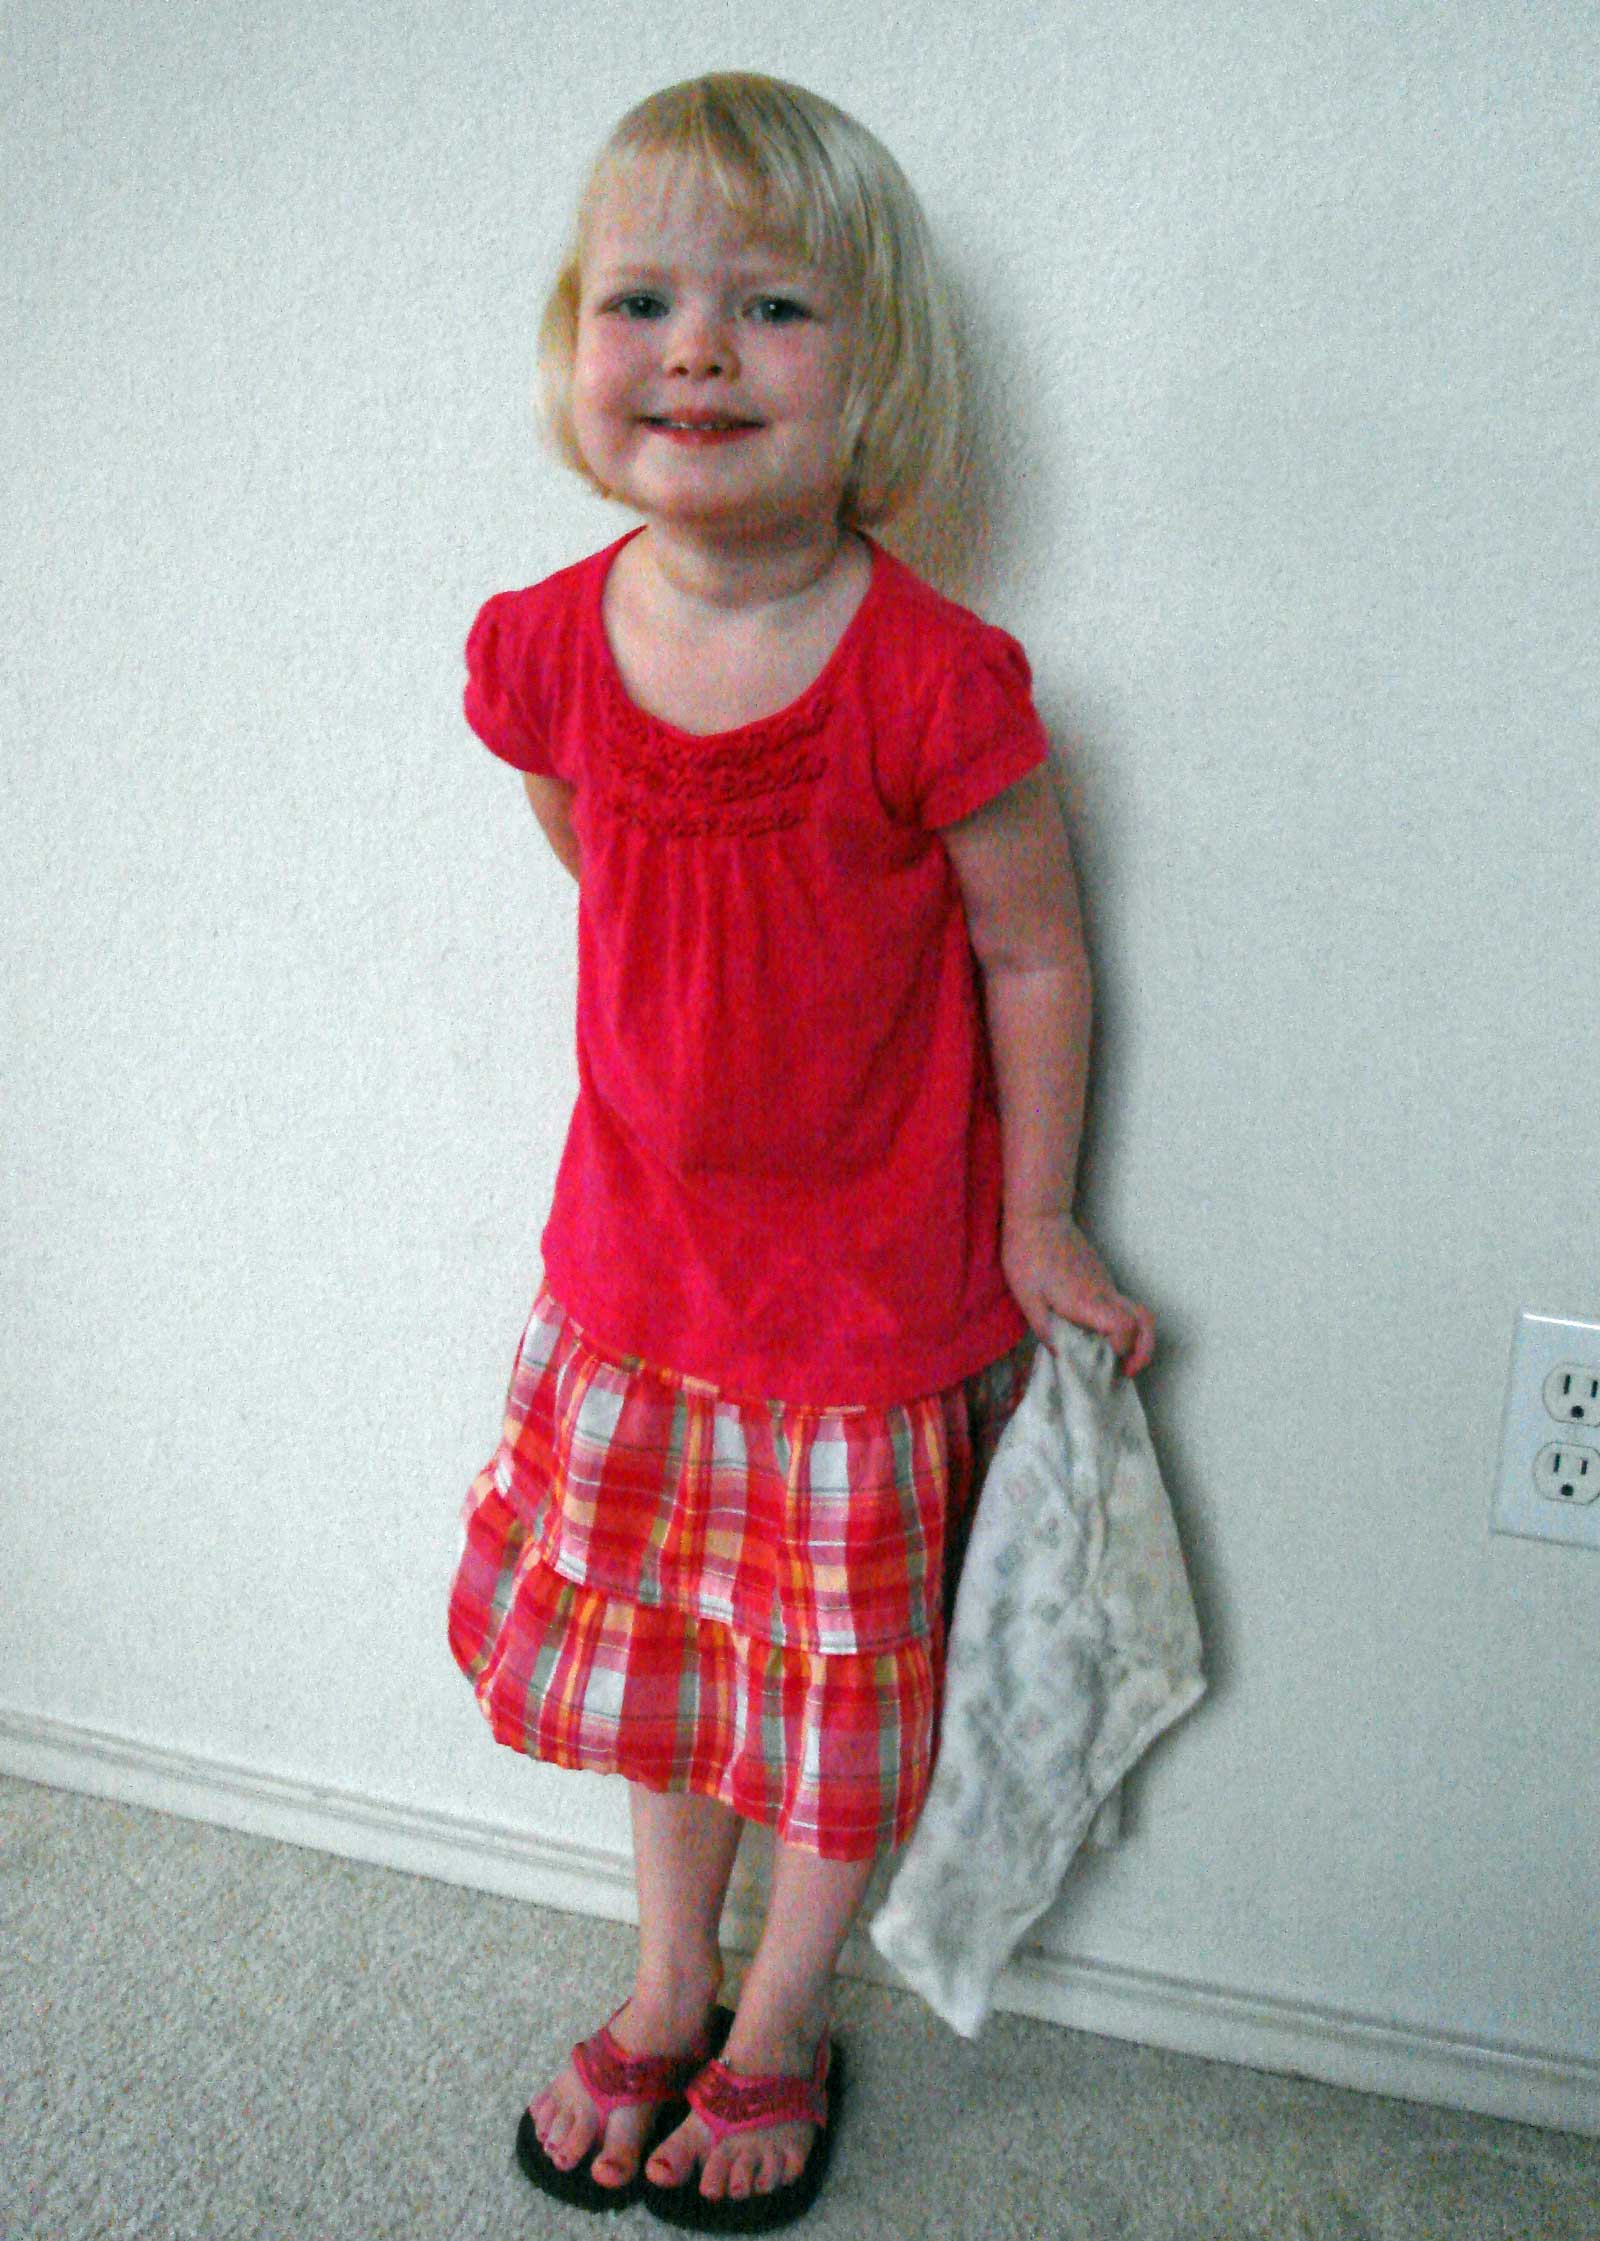 Emilyʼs first day at preschool